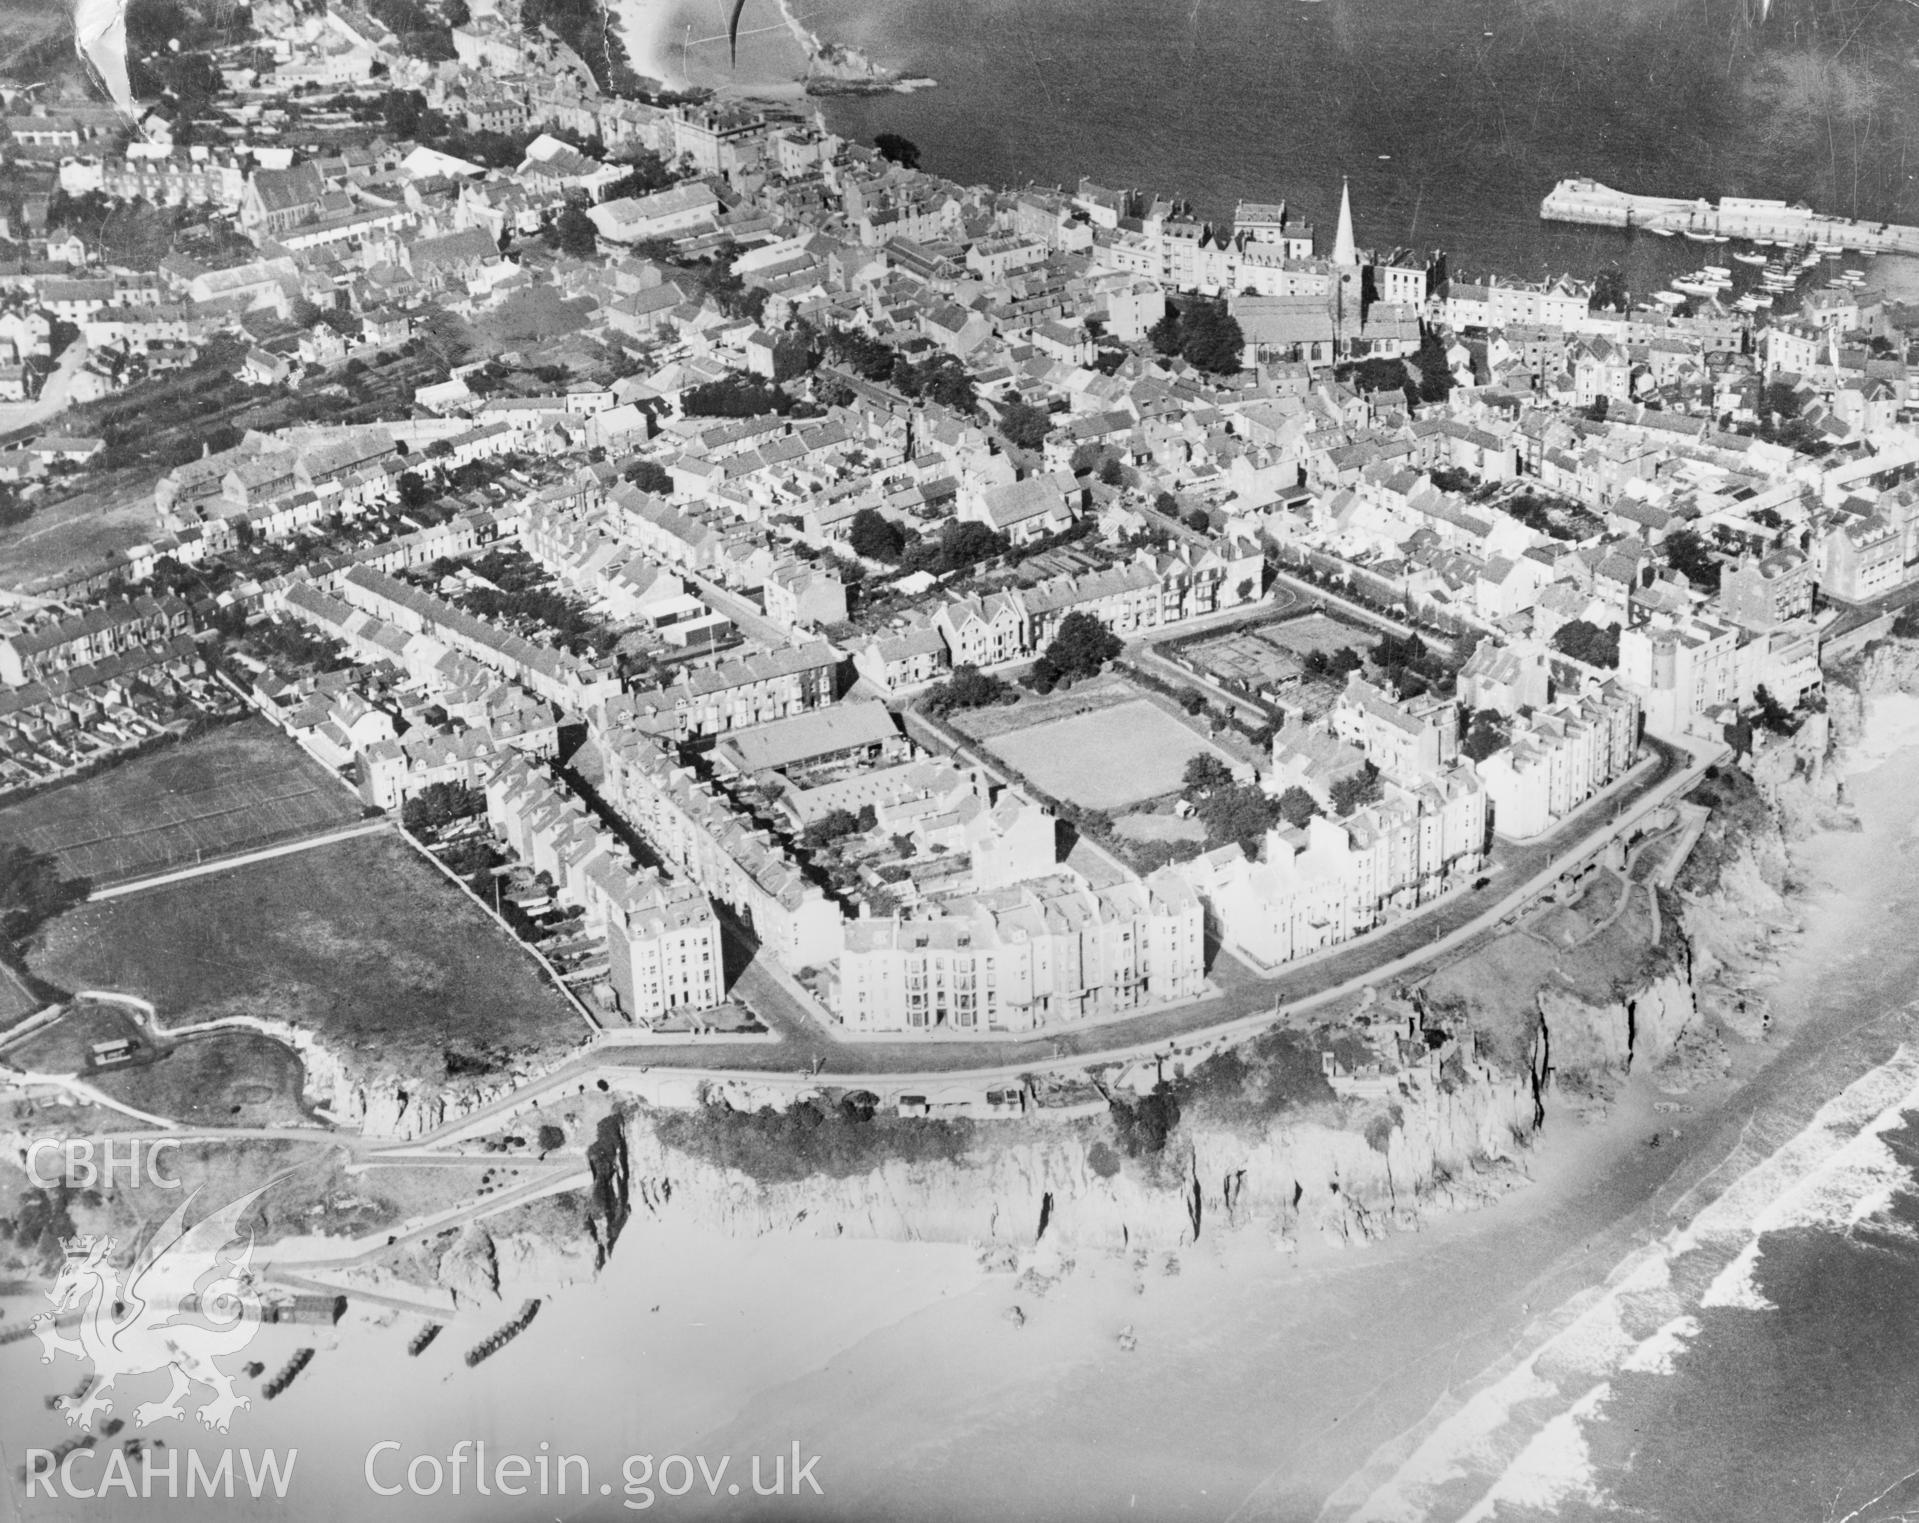 General view of Tenby showing the Esplanade. Oblique aerial photograph, 5?x4? BW glass plate.